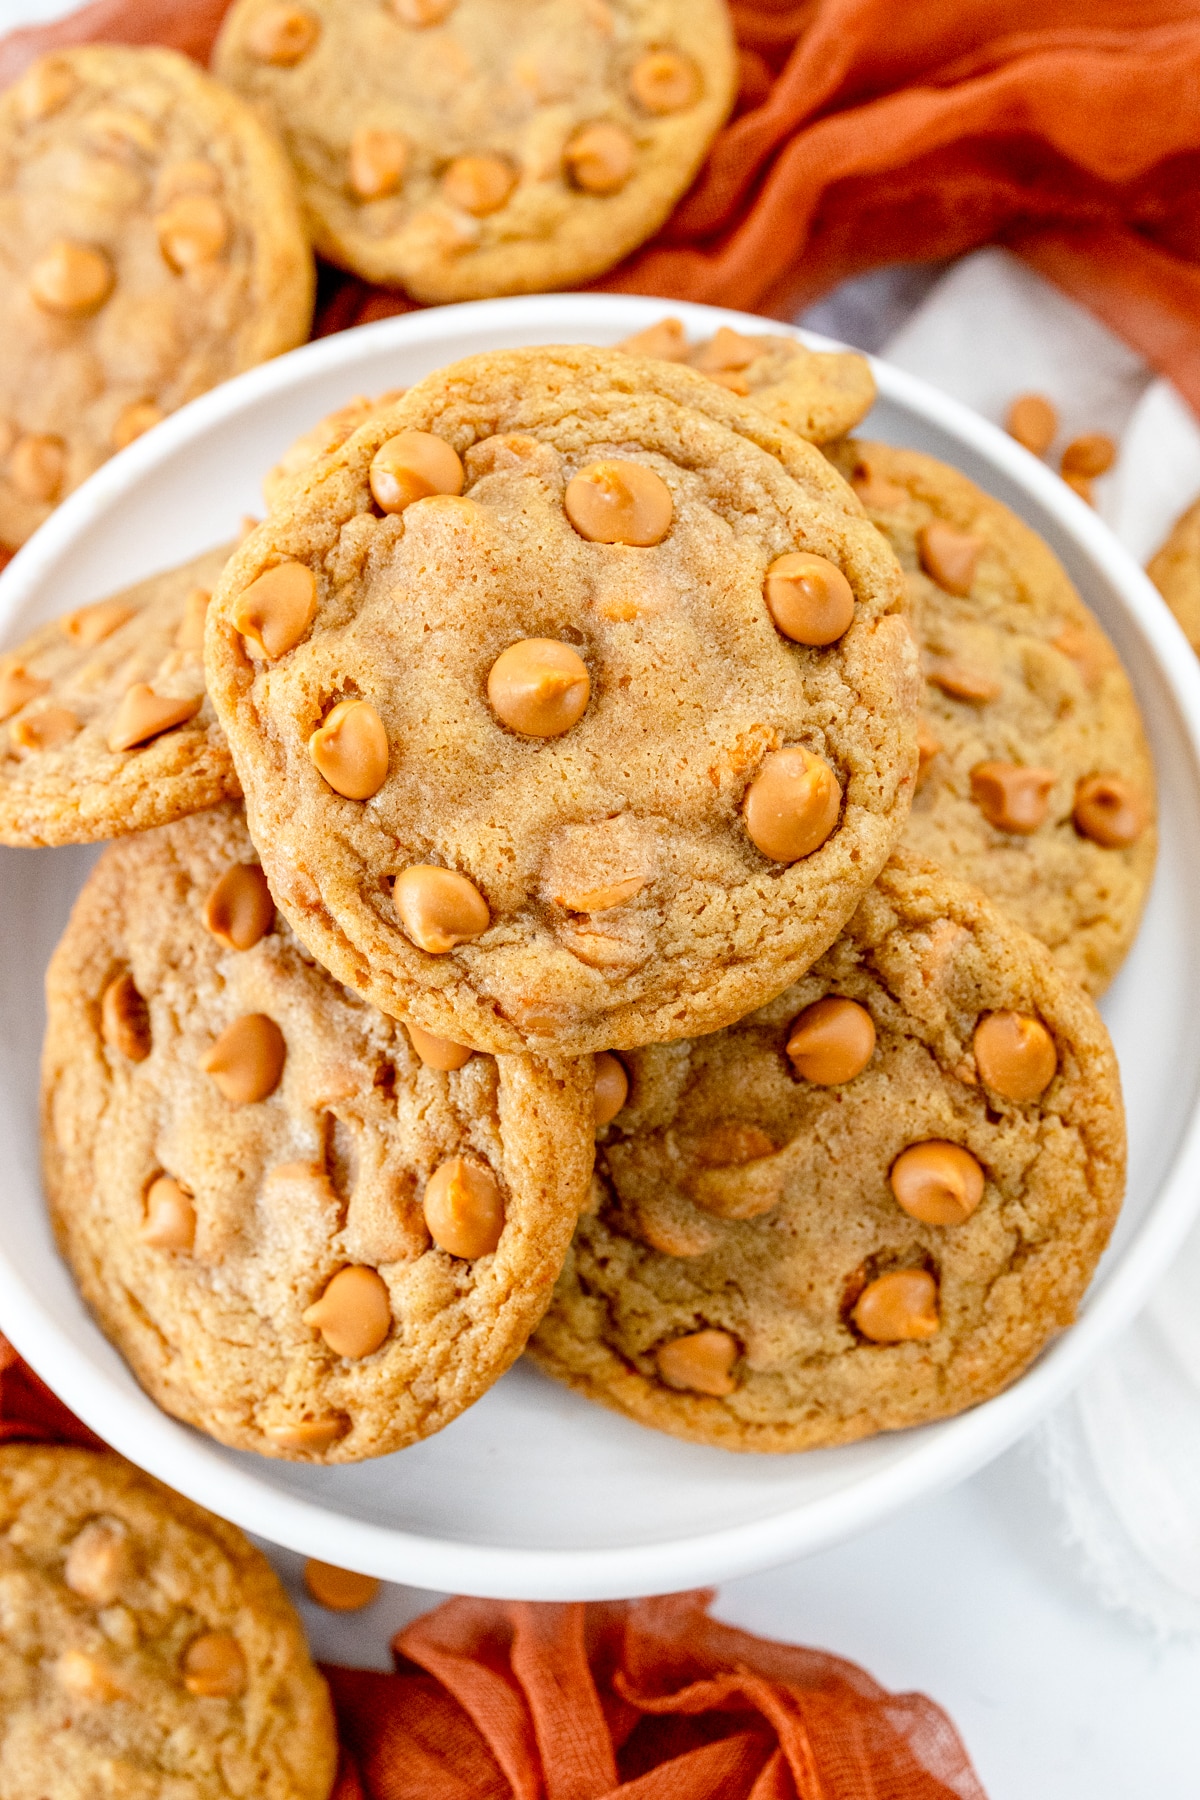 Top view of a plate of Butterscotch Chip Cookies, with other cookies around it.